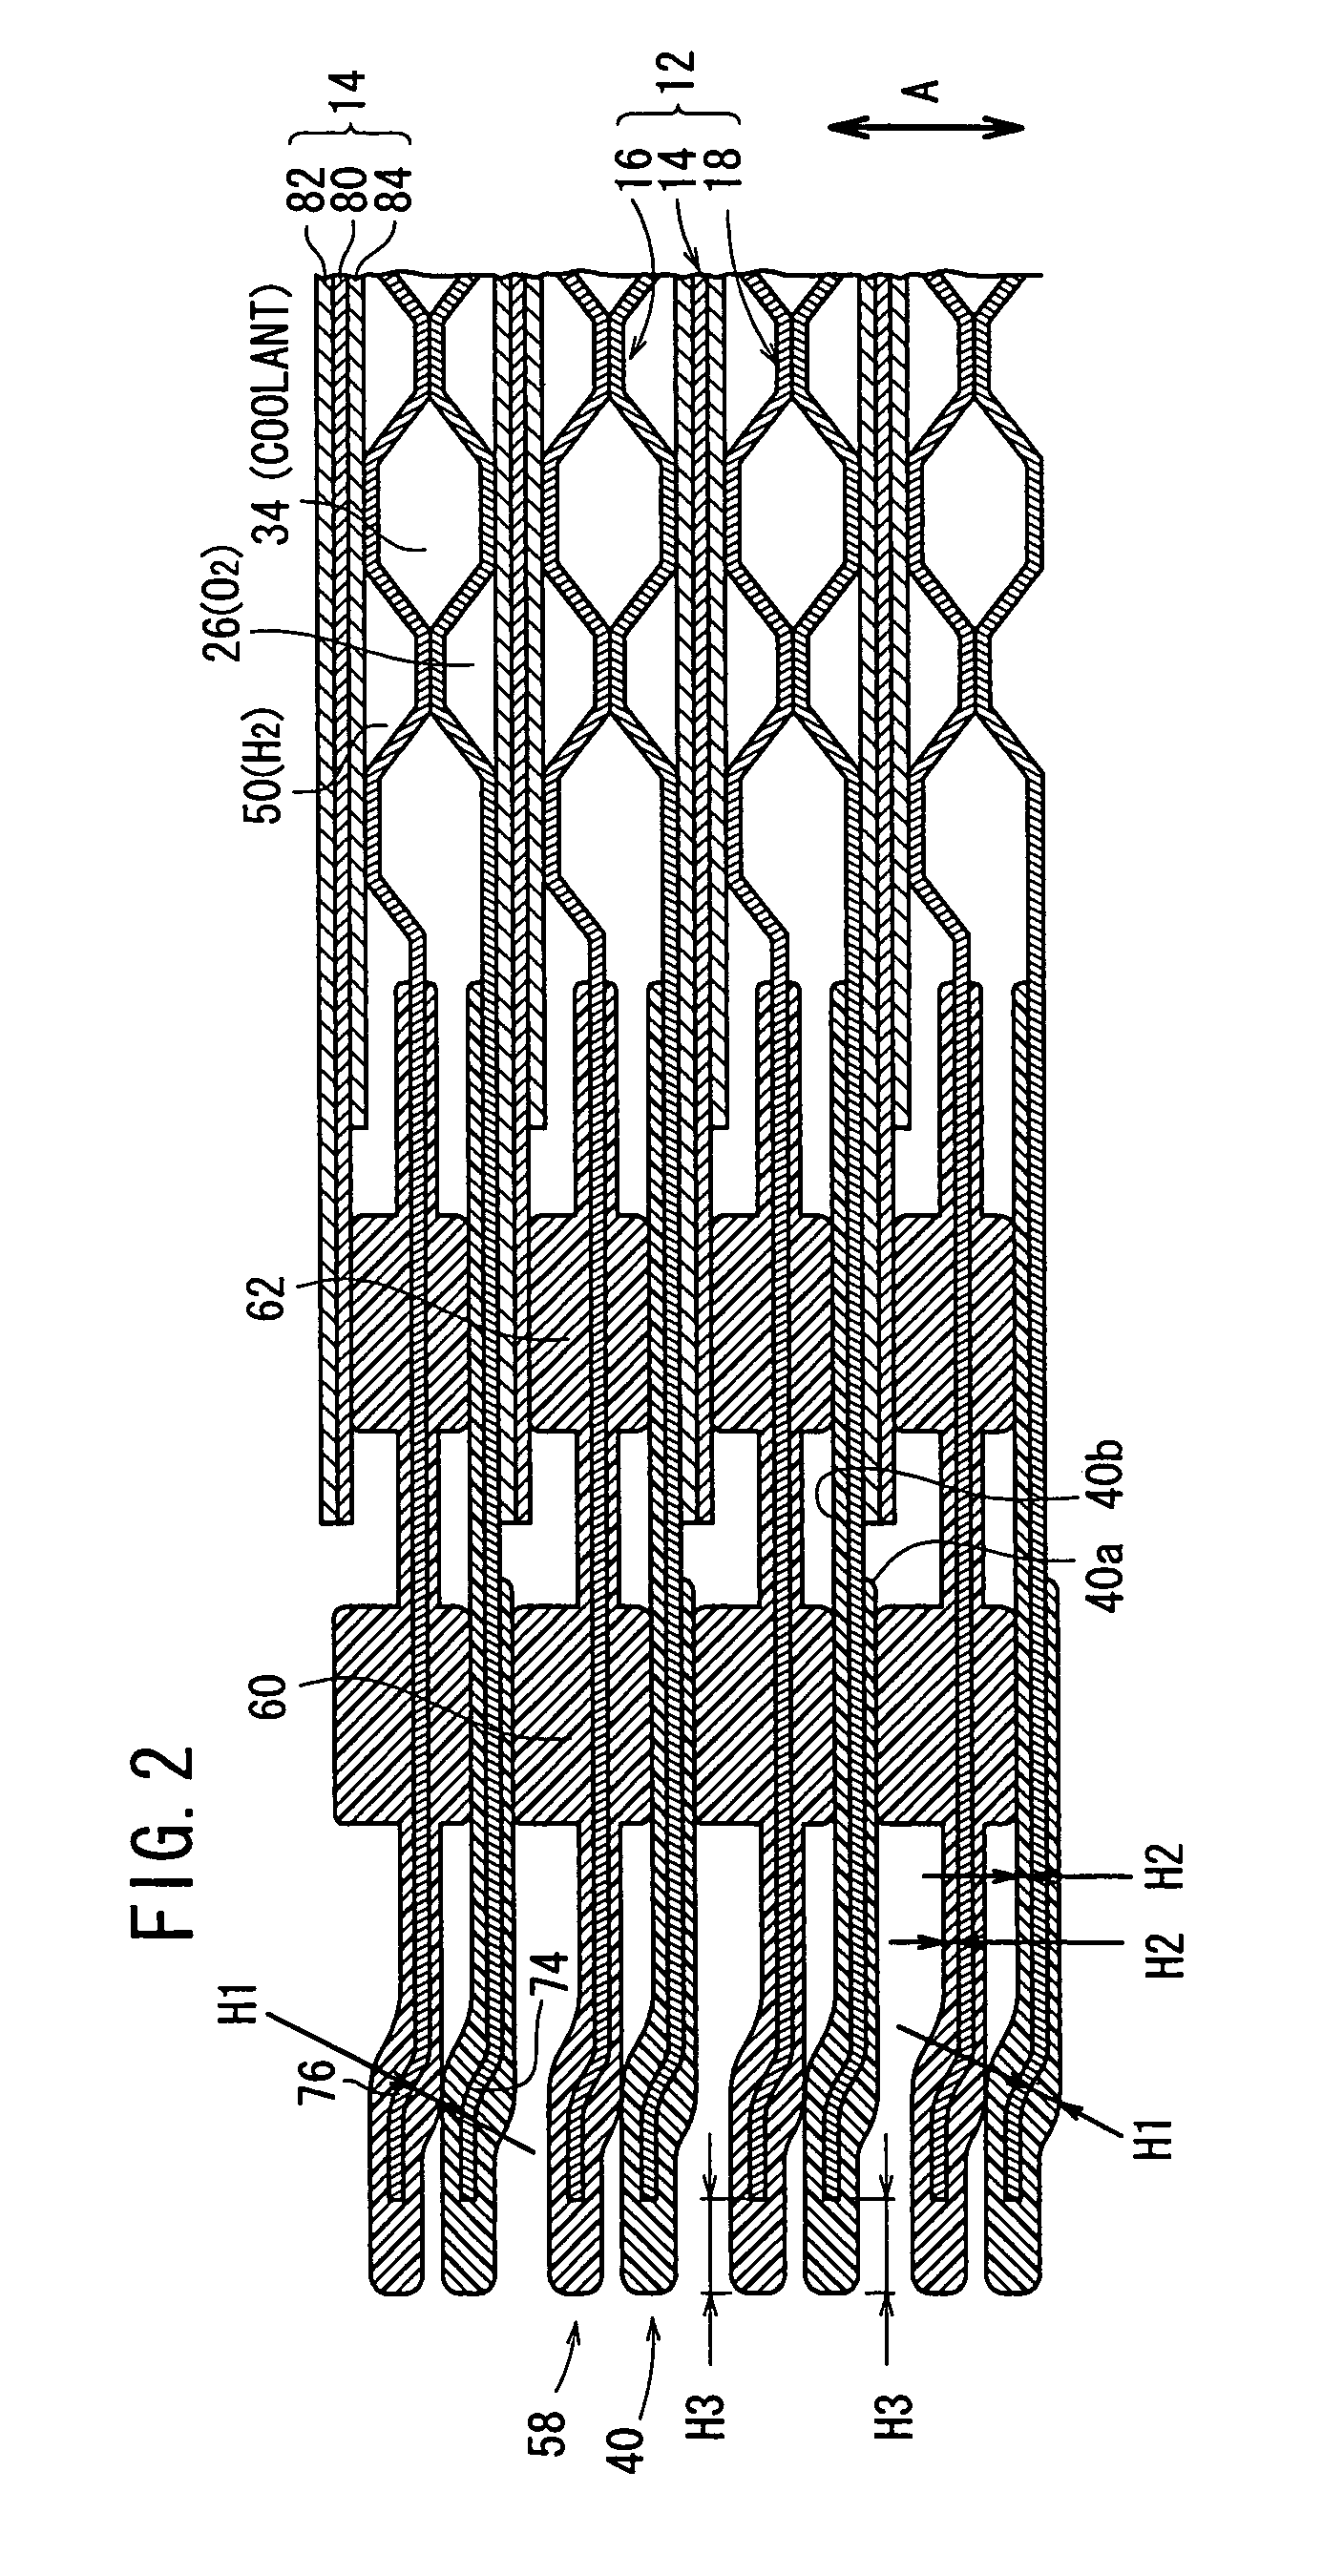 Fuel cell and metal separator for fuel cell